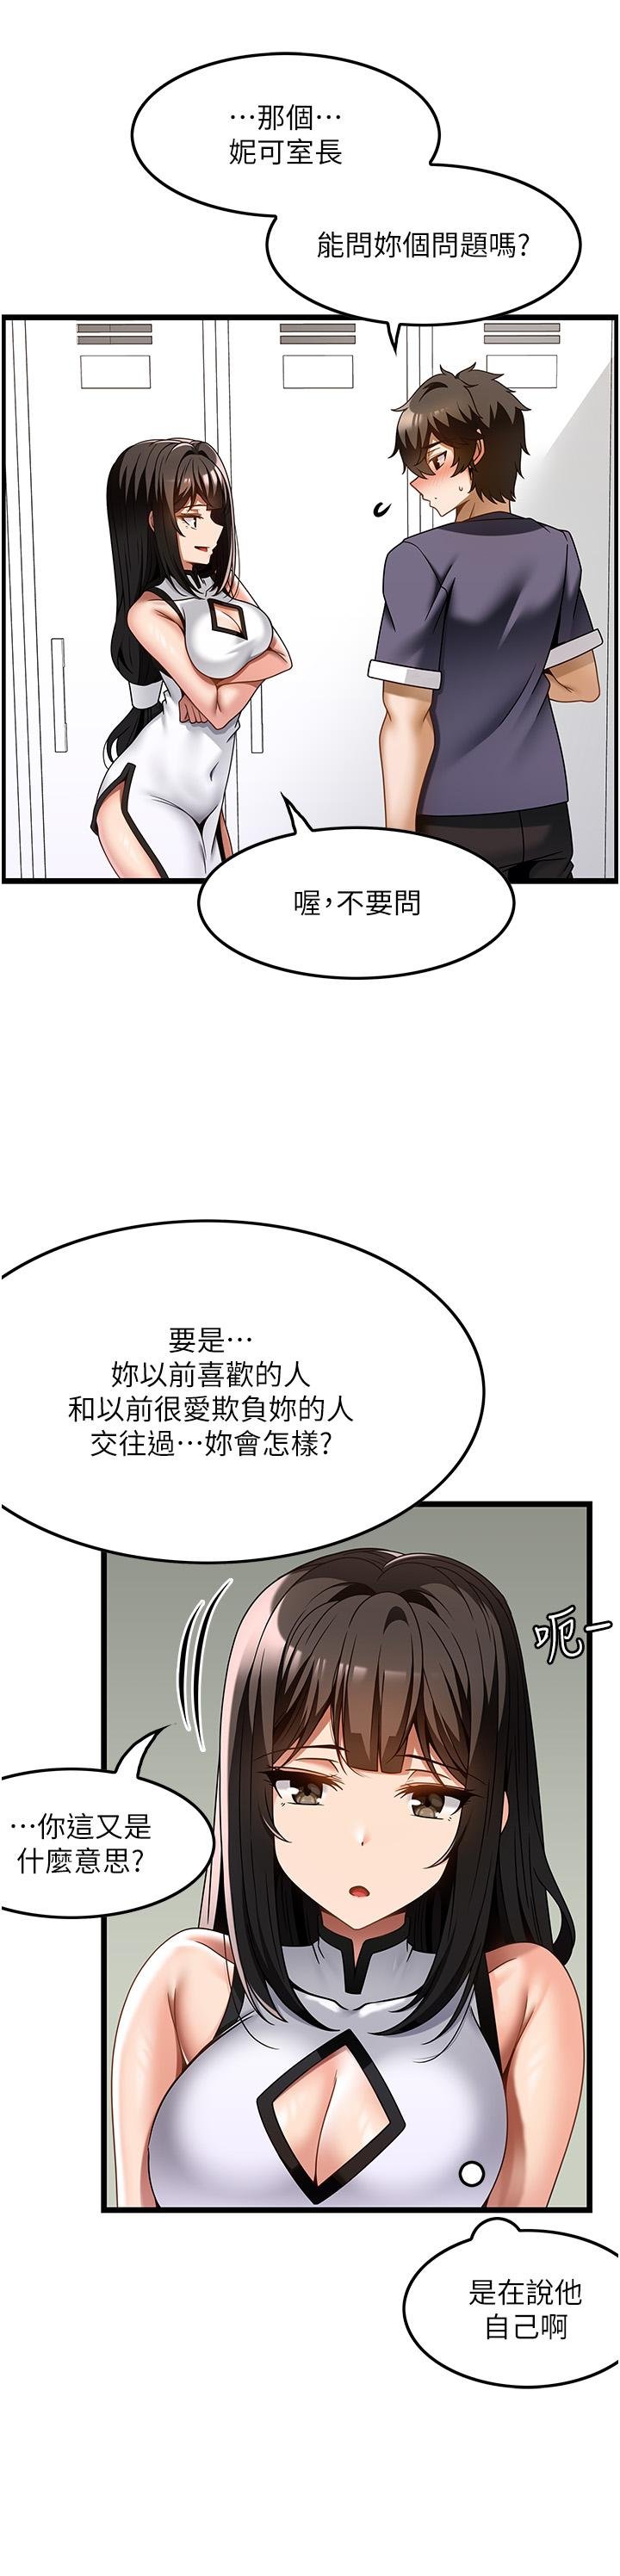 too-good-at-massages-raw-chap-34-10